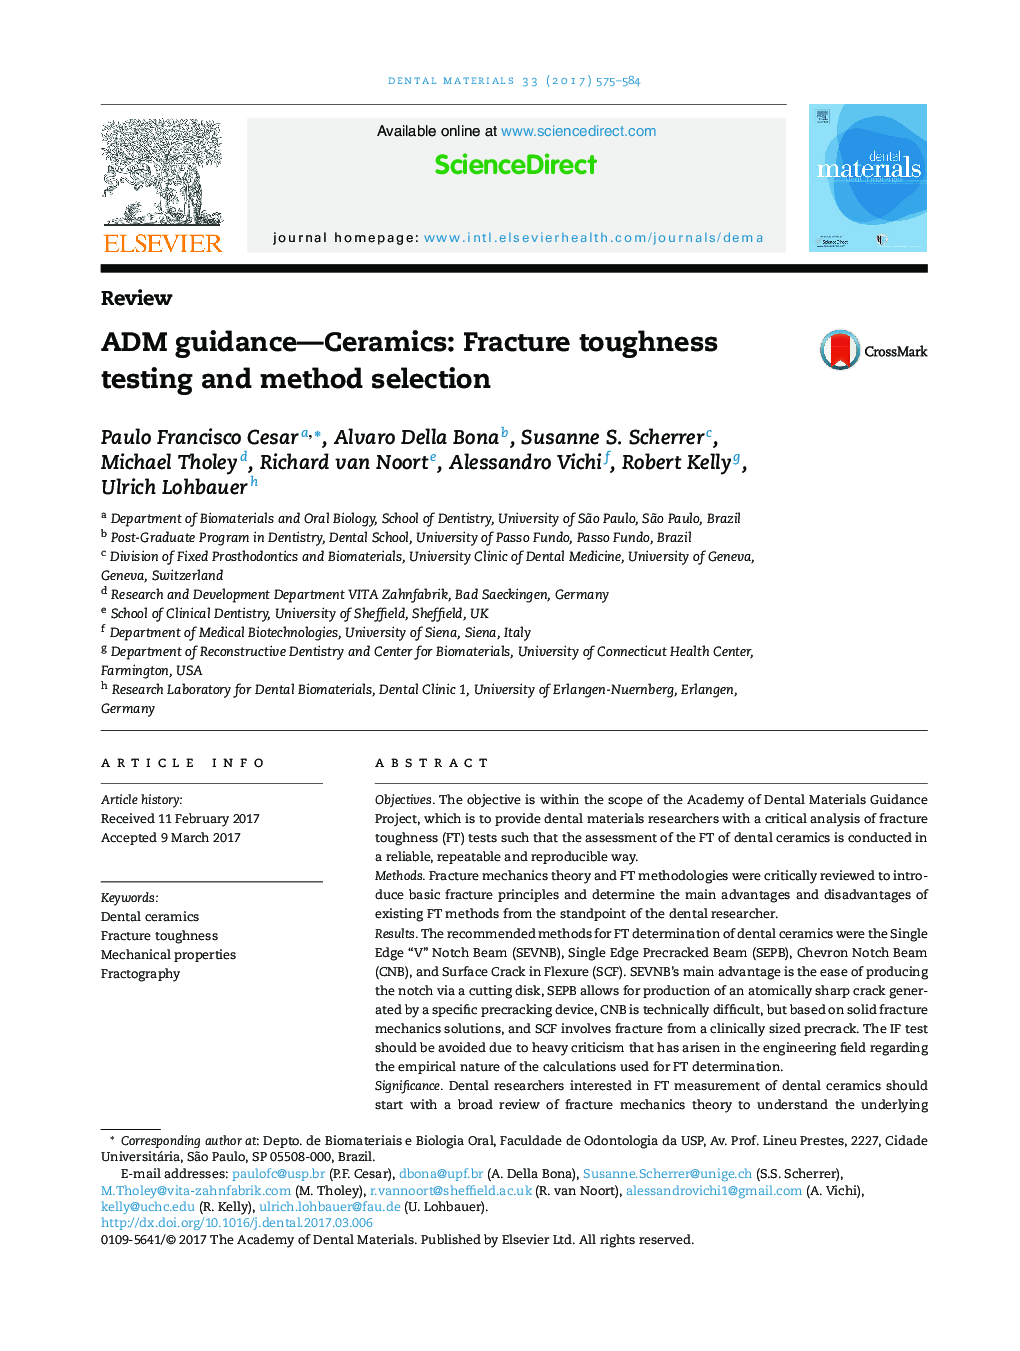 ADM guidance-Ceramics: Fracture toughness testing and method selection